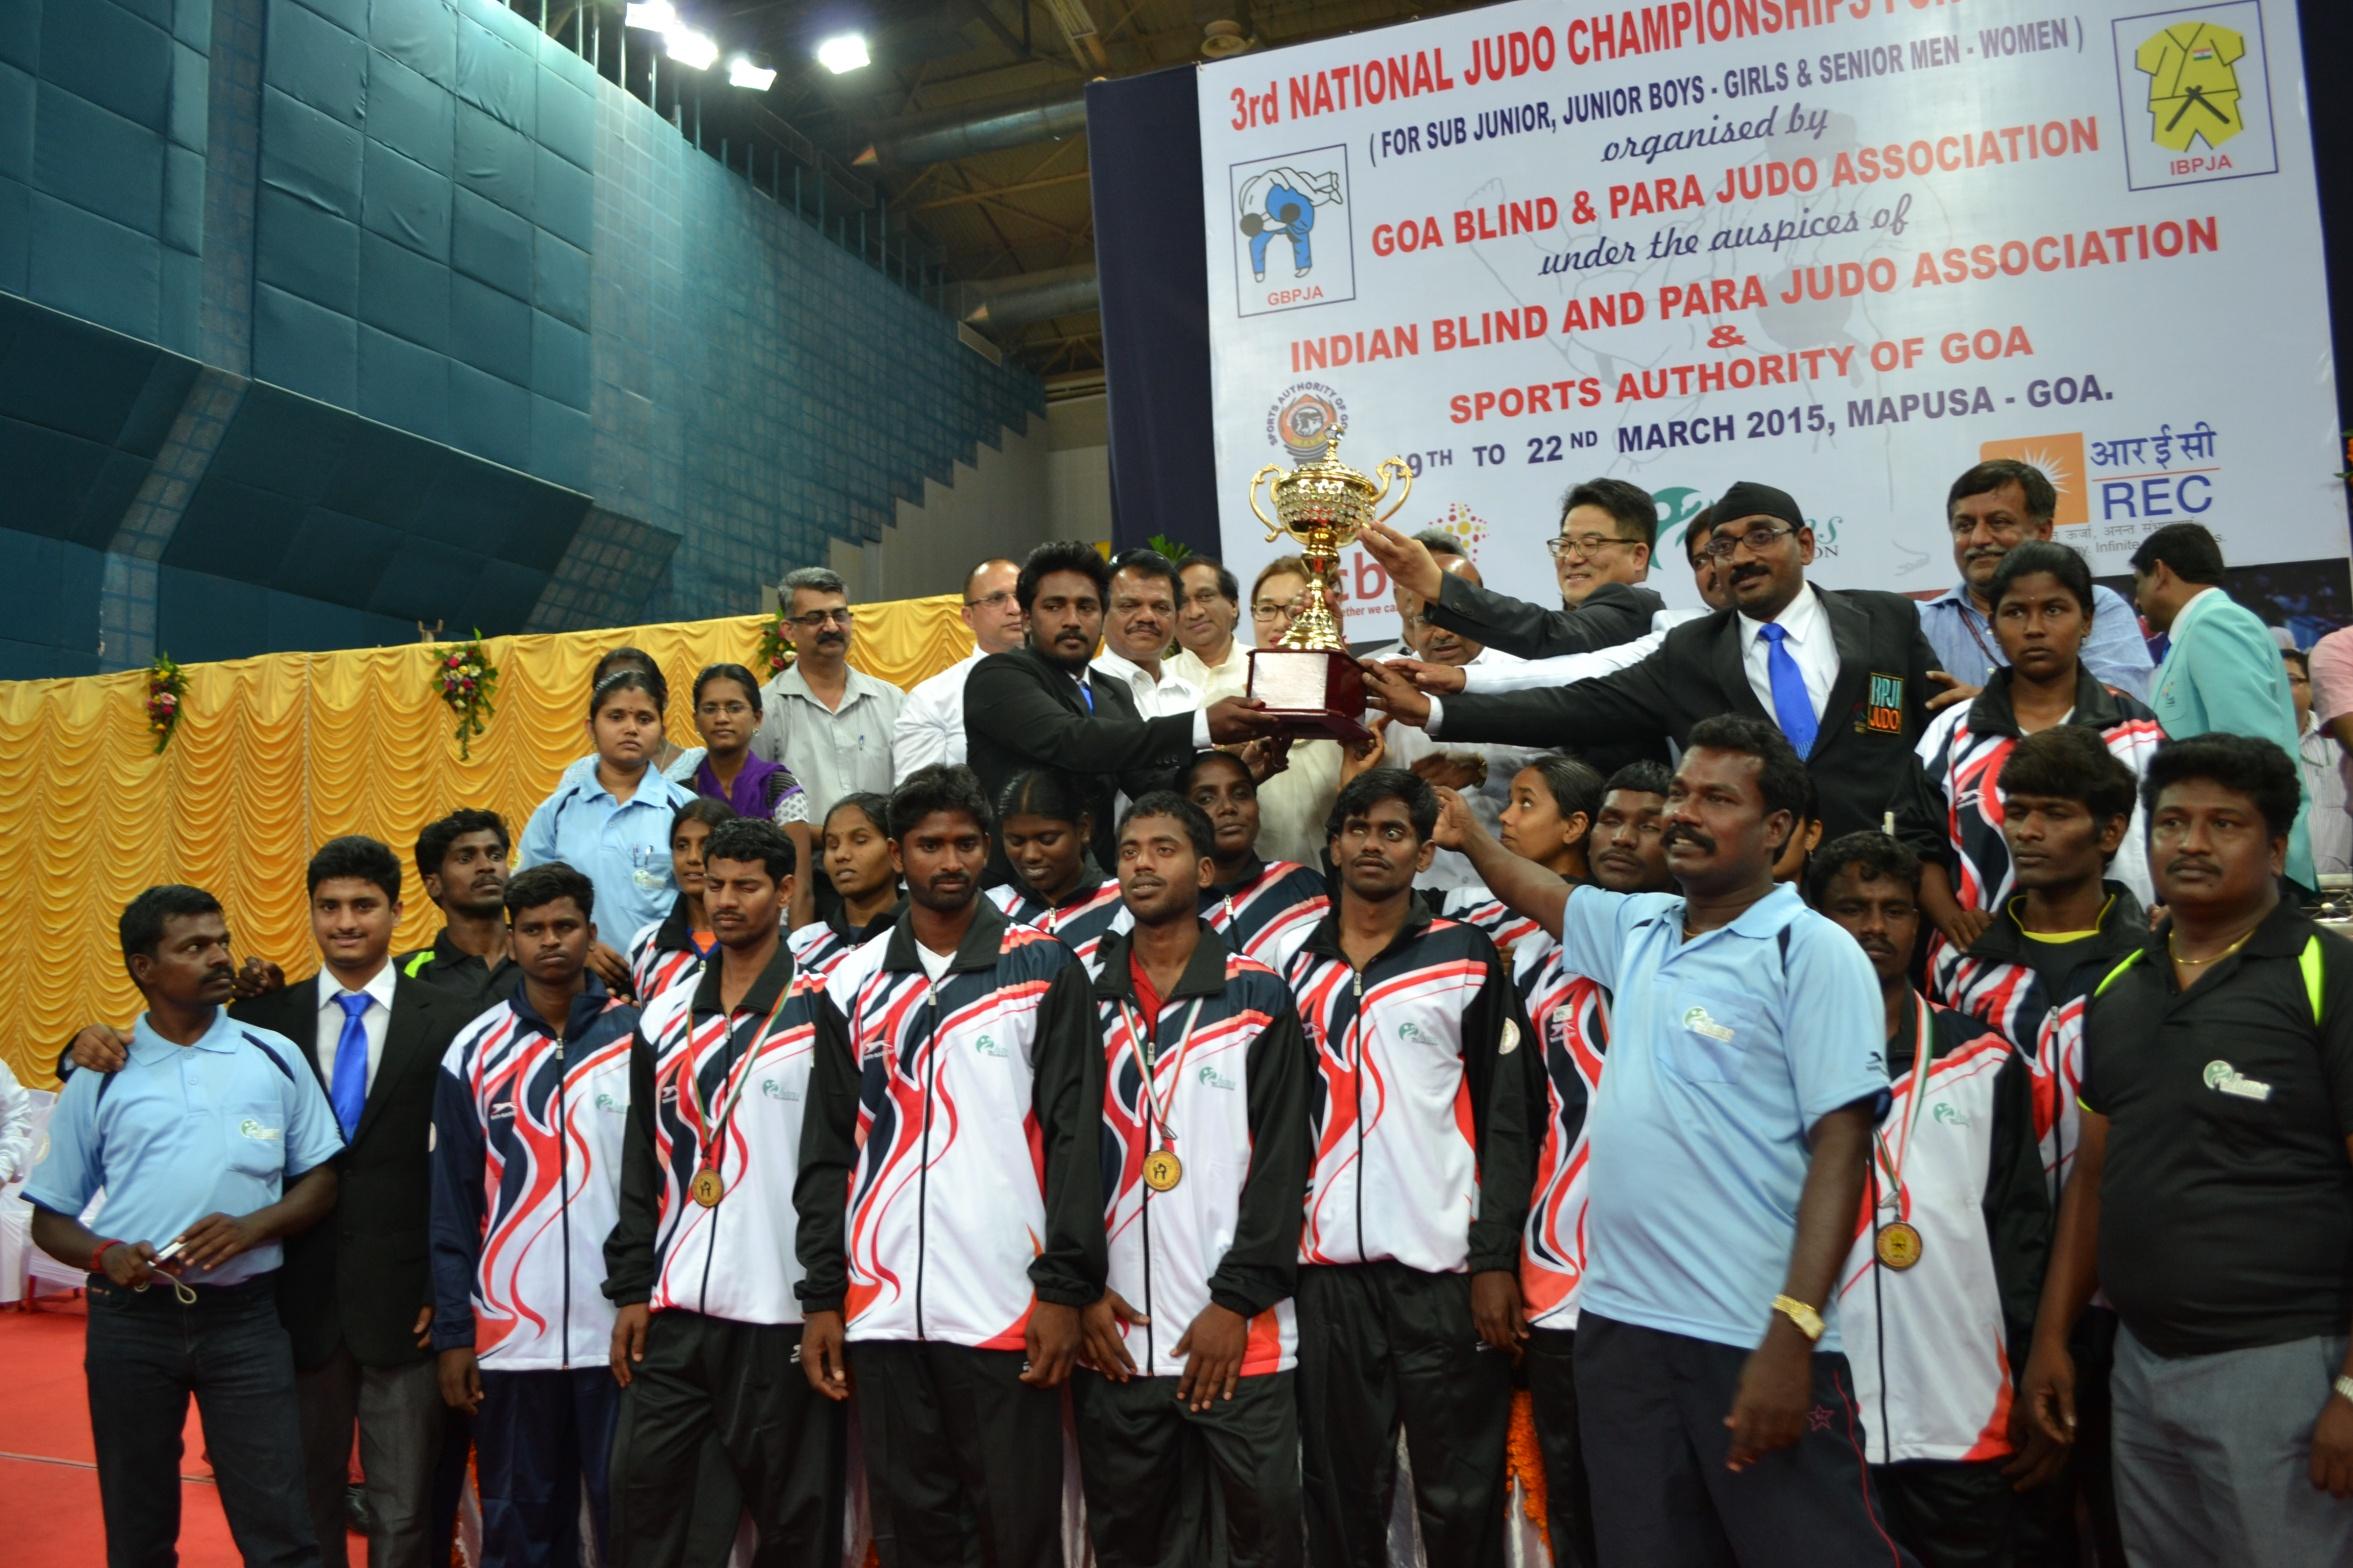 Tamilnadu blind and deaf senior judo team after winning overall  championship  receive runnersup trophy with sports minister, goa